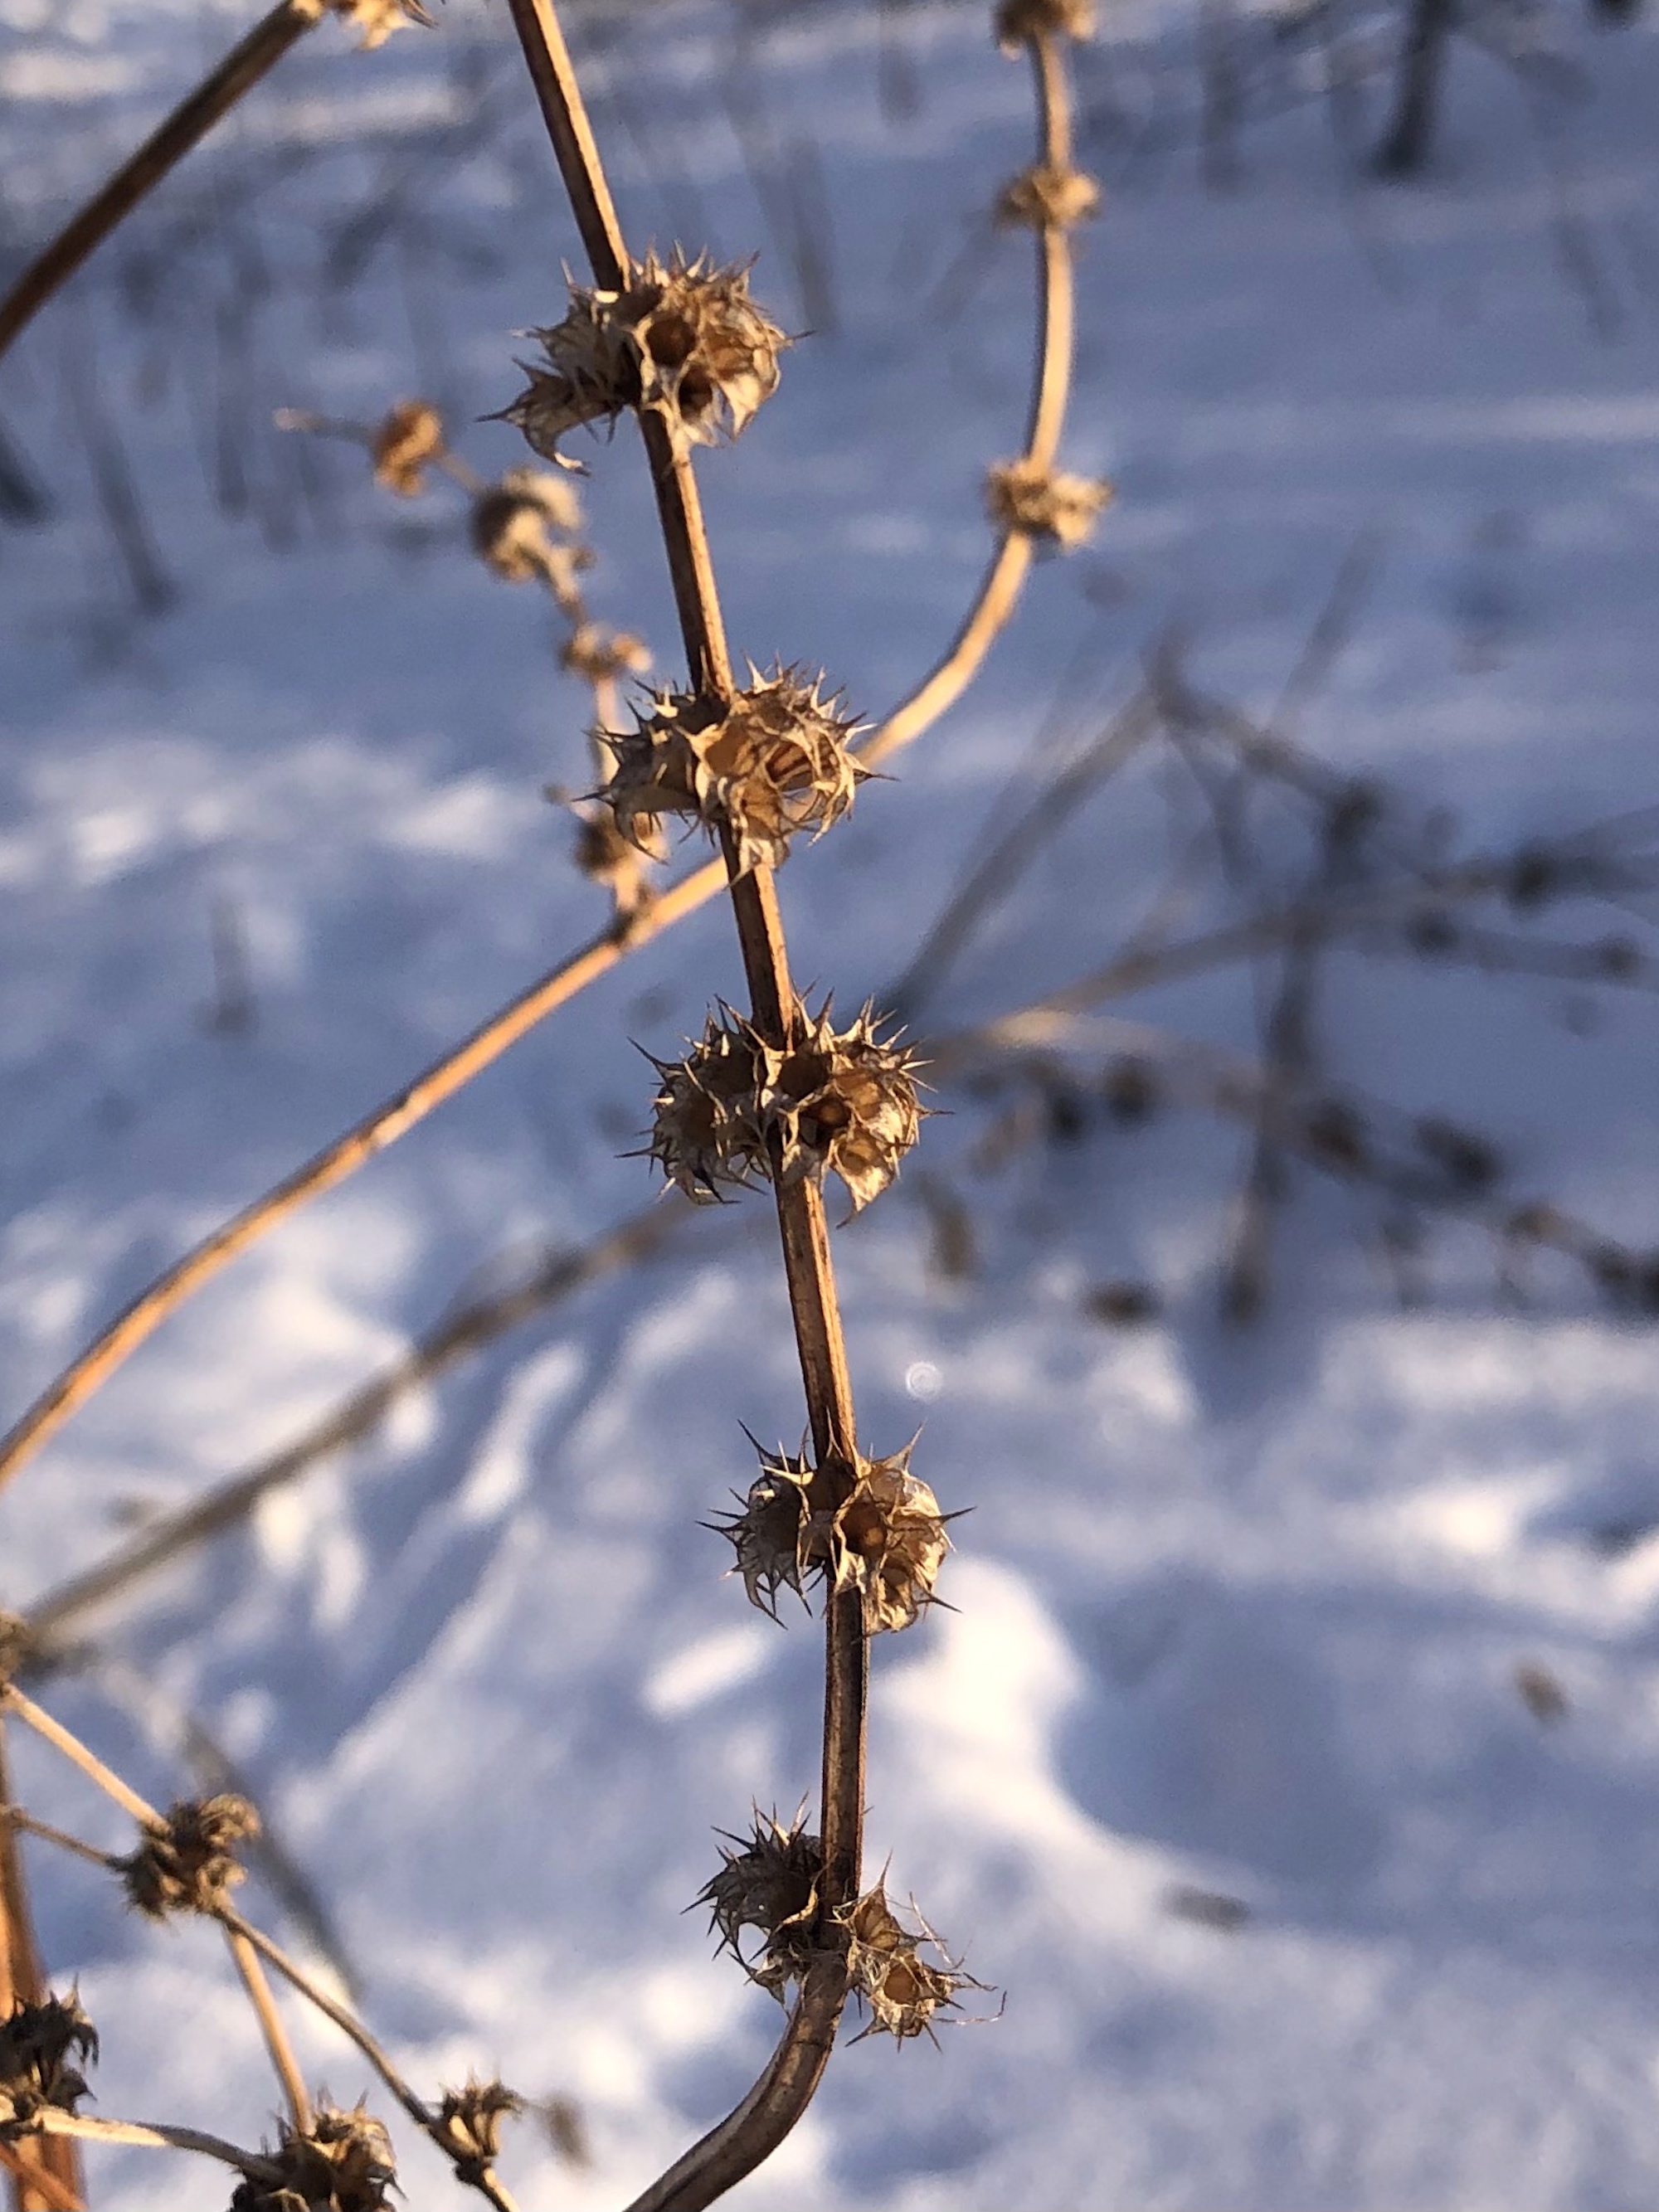 Motherwort in Arboretum by Duck Pond in Madison, Wisconsin on January 21, 2021.